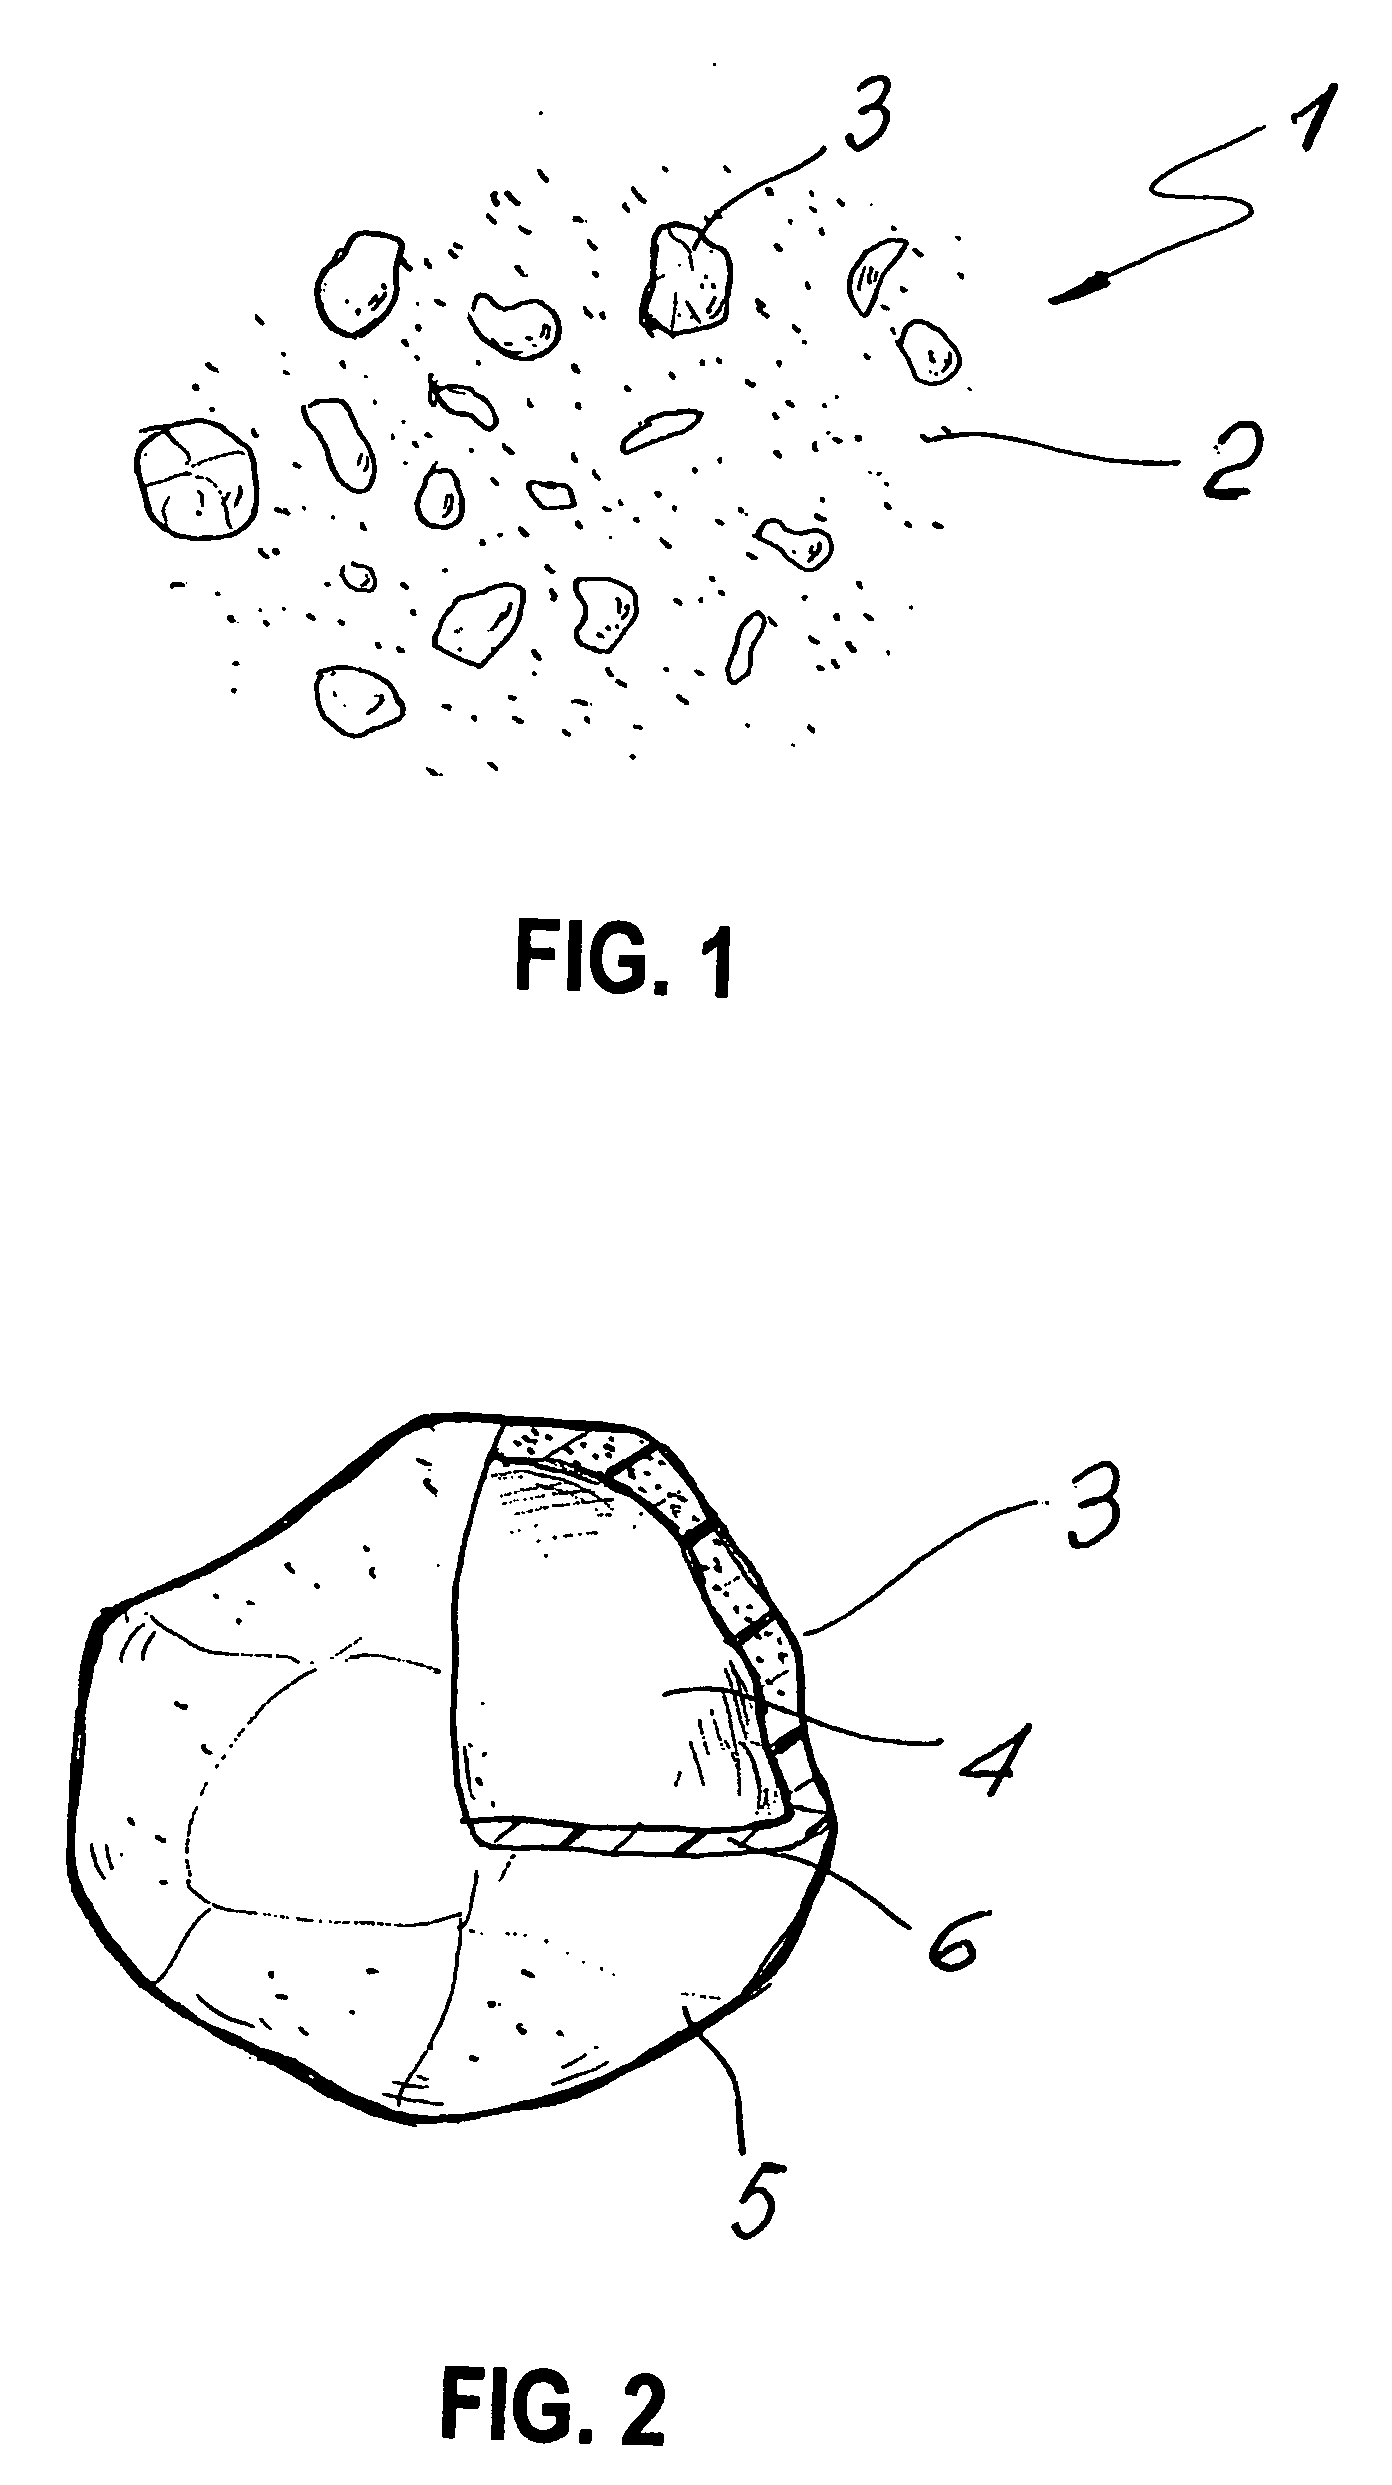 Bone cement containing coated radiopaque particles and its preparation